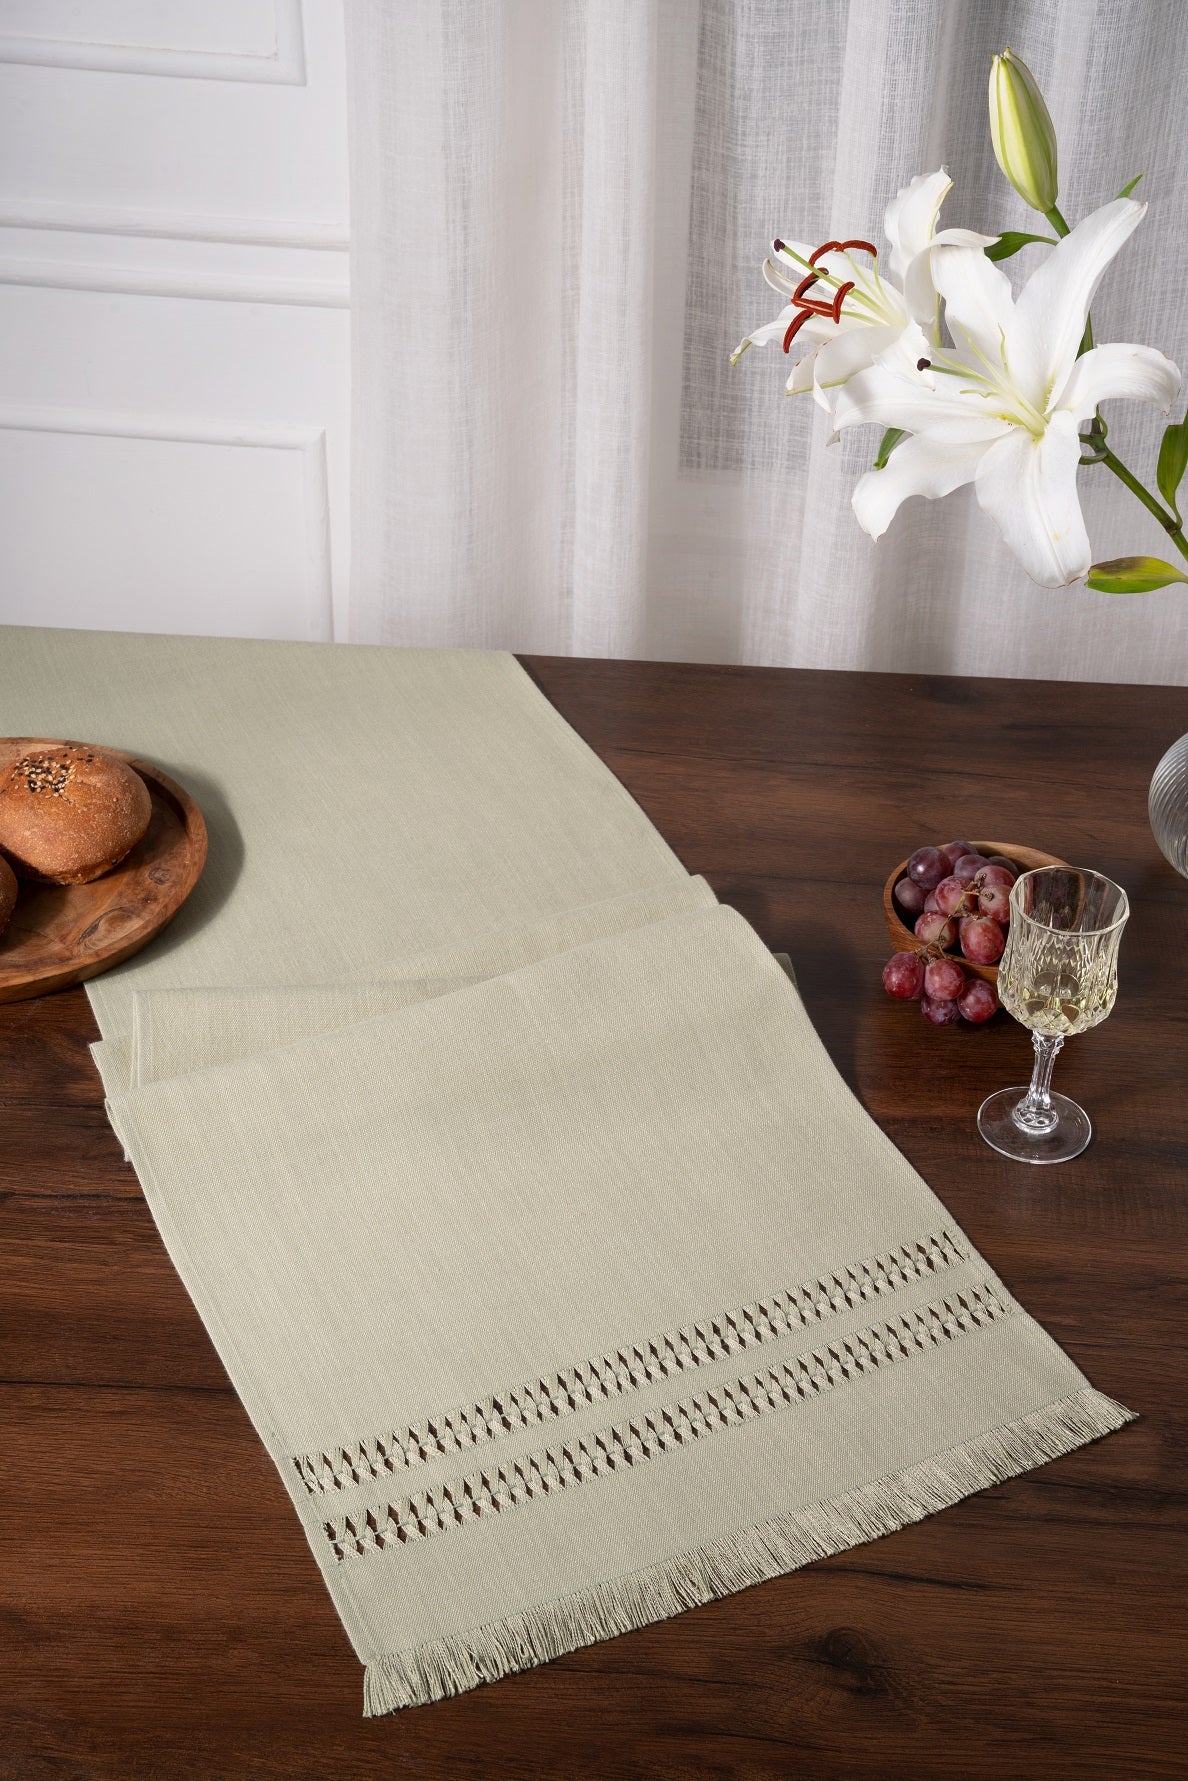 Sage Green Linen Look Recycled Fabric Hand Hemstitch Table Runner